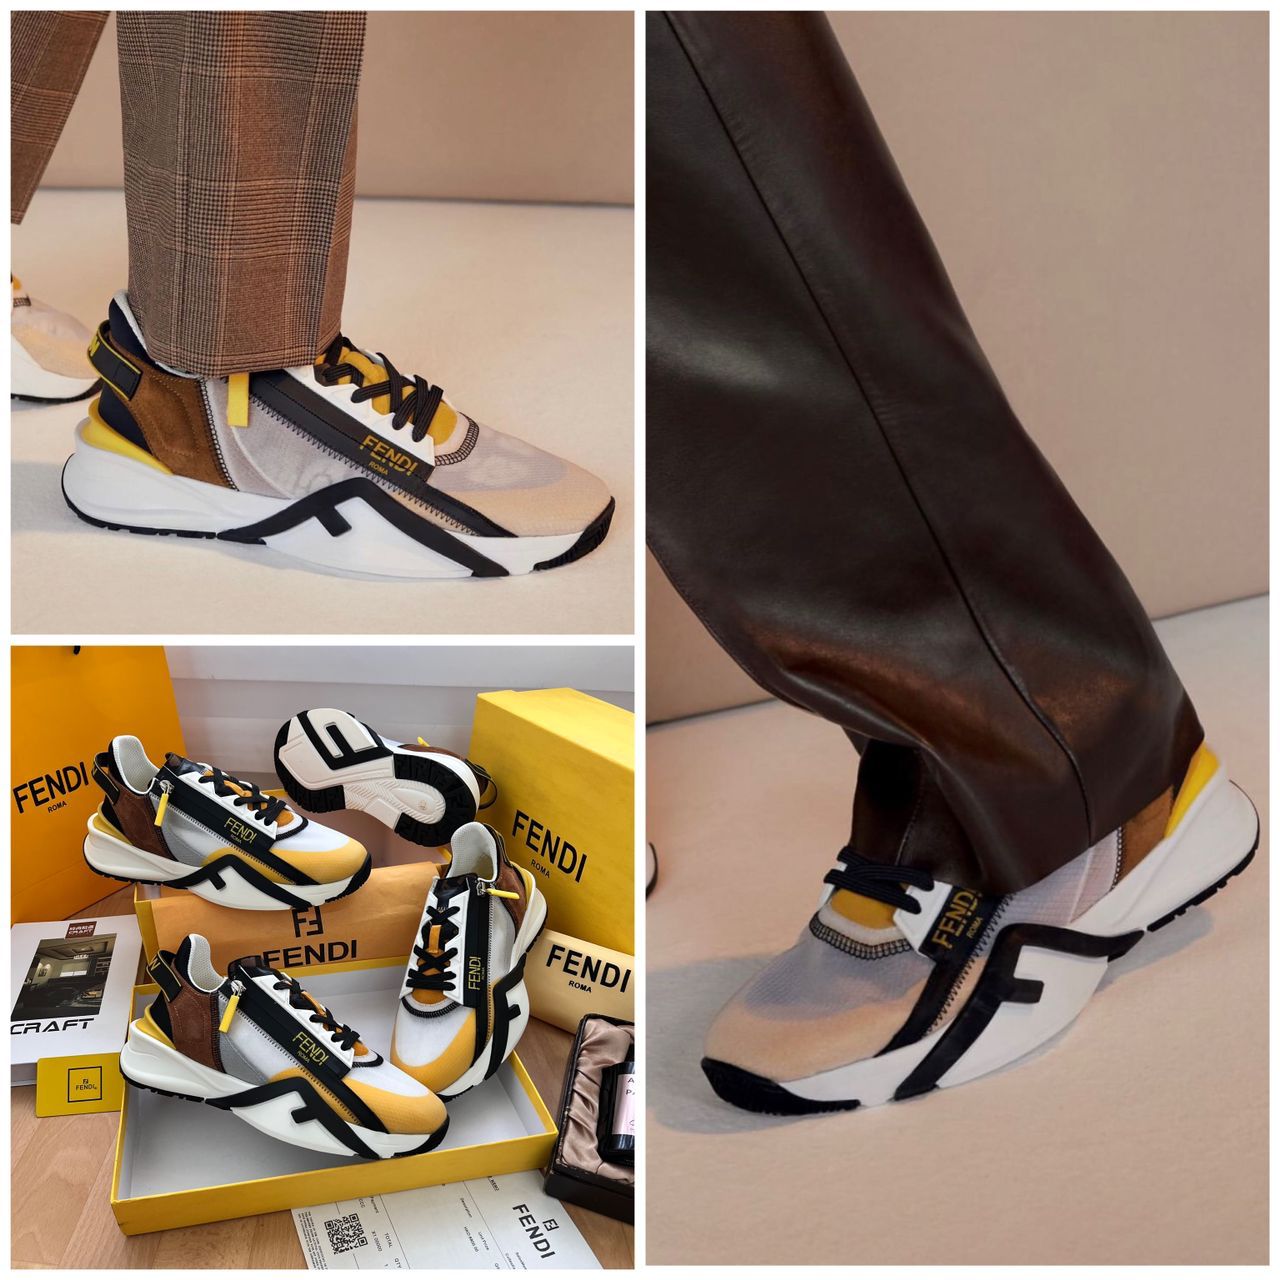 DESIGNER ZIP FLOW TRAINER SNEAKERS for CartRollers Marketplace For Shopping Online, Fashion, Electronics, Phones, Computers and Buy Men Shoe, Home Appliances, Kitchen-wares, Groceries Accessories,ankara, Aso Ebi, Beads, Boys Casual Wears, Children Children's Wears ,Corporate Shoes, Cosmetics Dress ,Dresses Fashion, Girls' Dresses ,Girls' Wears, Hair Care ,Jewelries ,Jewelry Kids, Kids' Fashion Ladies ,Wears Lapel Pins, Loafers Shoe Men ,Men's Caftan, Men's Casual Soes, Men's Fashion, Men's Shoes, Men's Wears, Moccasin Shoe, Natural Hair, In Lagos Nigeria